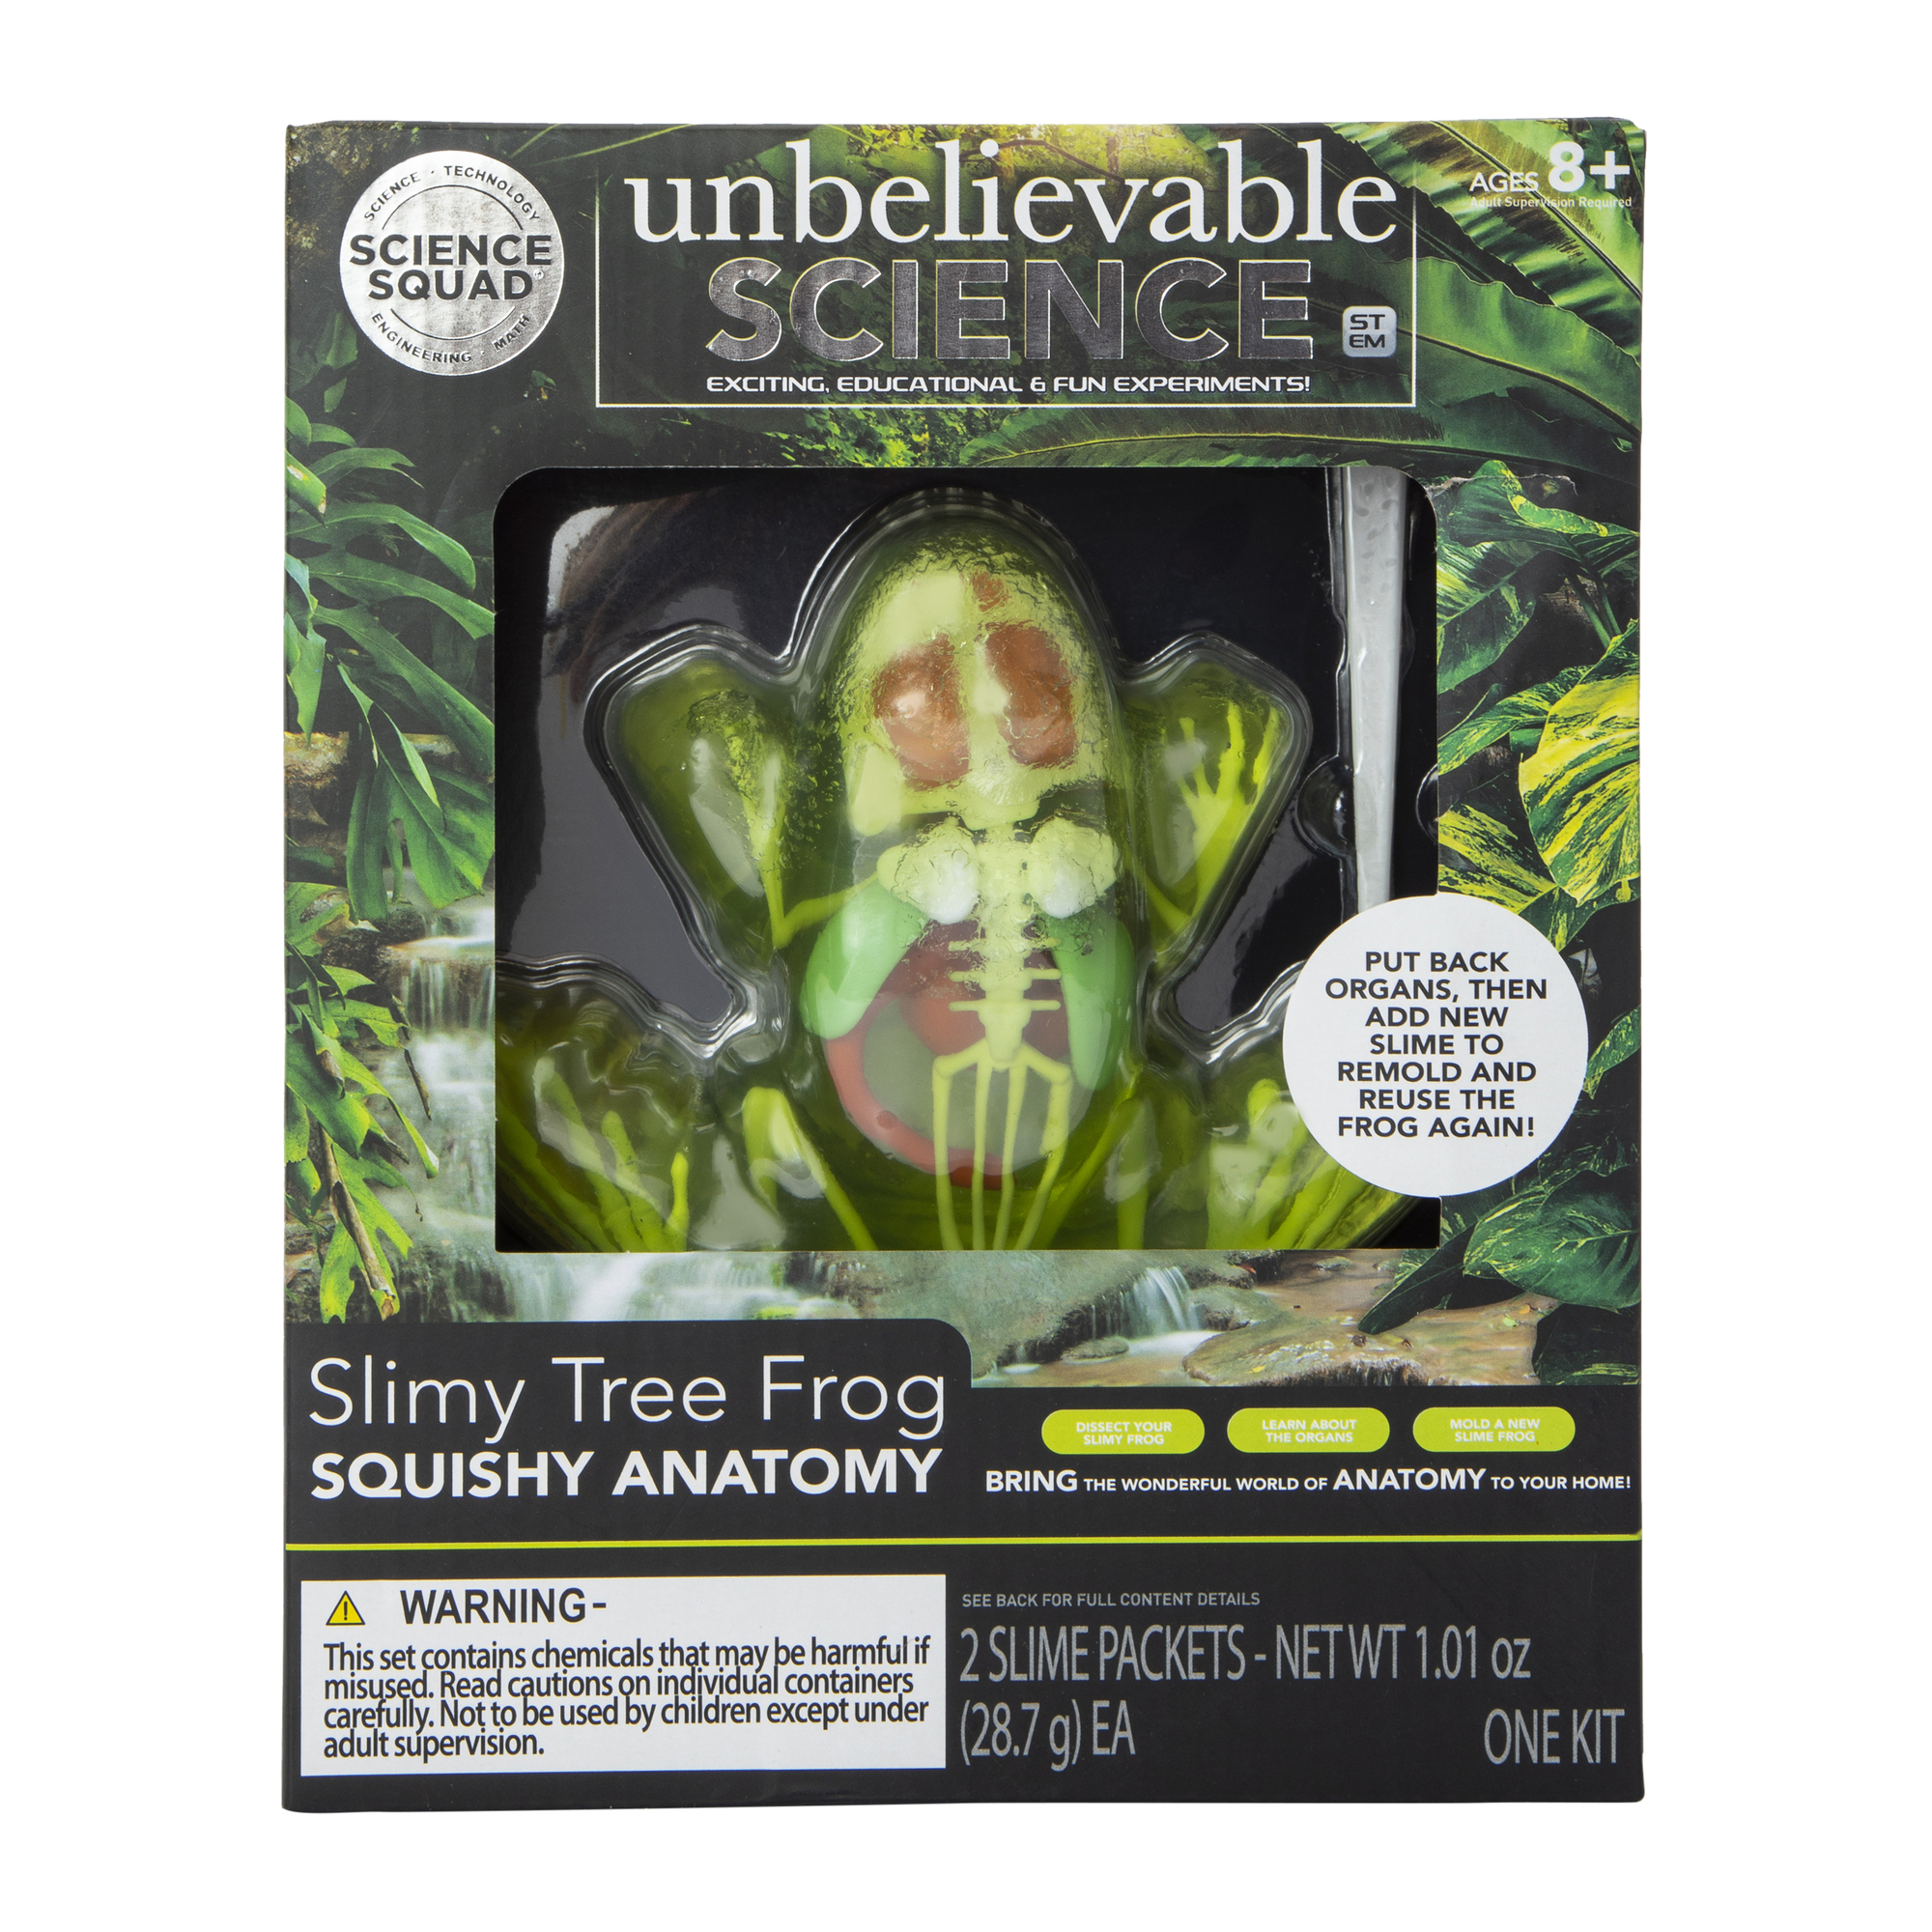 Five Below The science squad® unbelievable science slimy tree frog